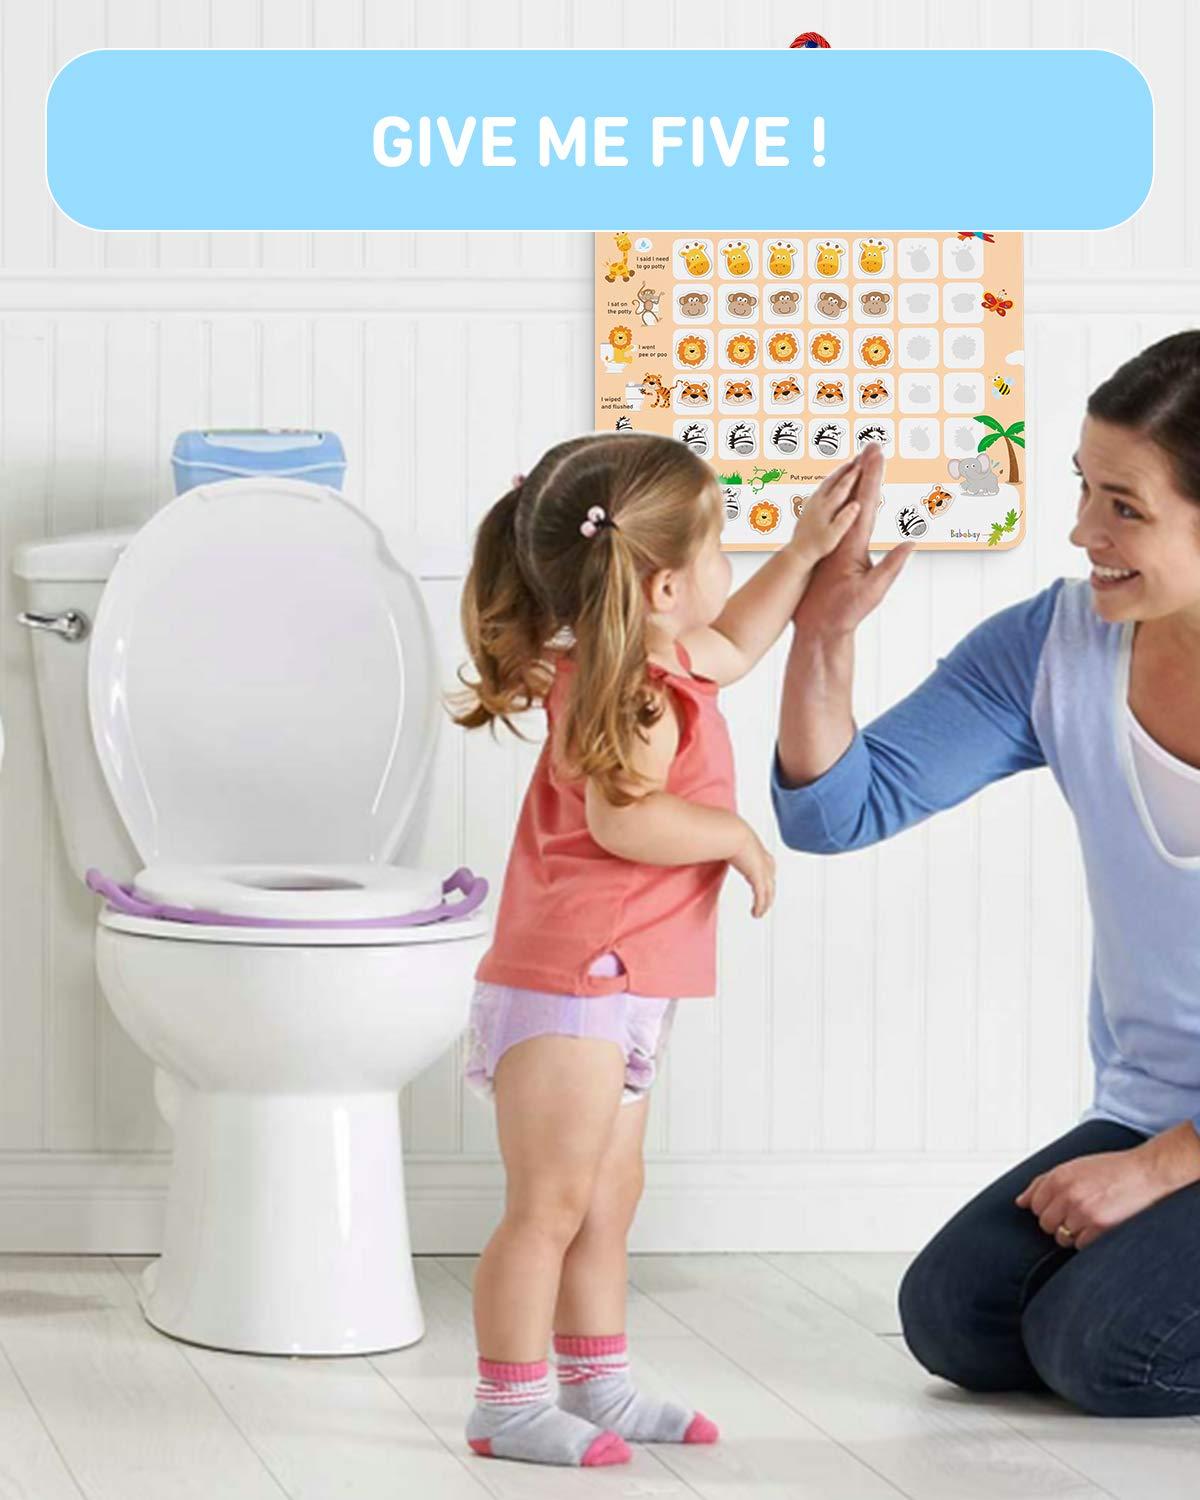 Potty Training Chart for Toddlers,Boys,Girls - Animal Design - Magnetic  Sticker Chart, Waterproof Magnetic Potty Training Reward Chart,  Certificate, 3 Instruction Steps, 35 Magnetic Stickers Funny Animal Theme